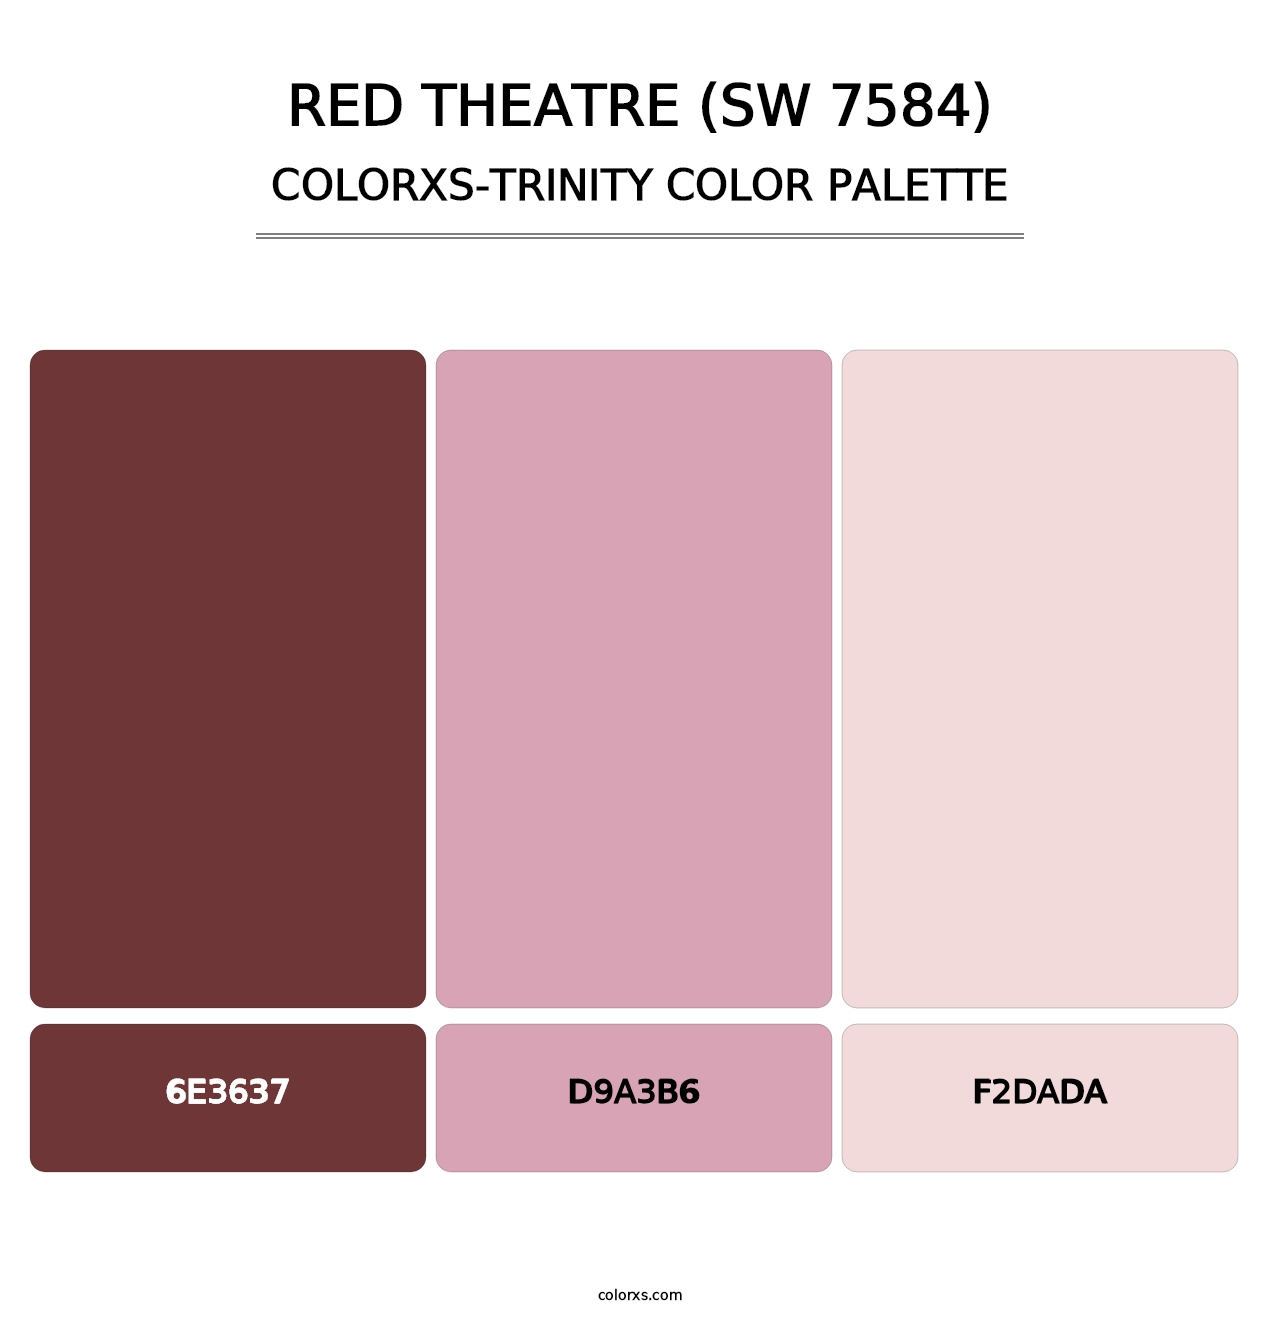 Red Theatre (SW 7584) - Colorxs Trinity Palette